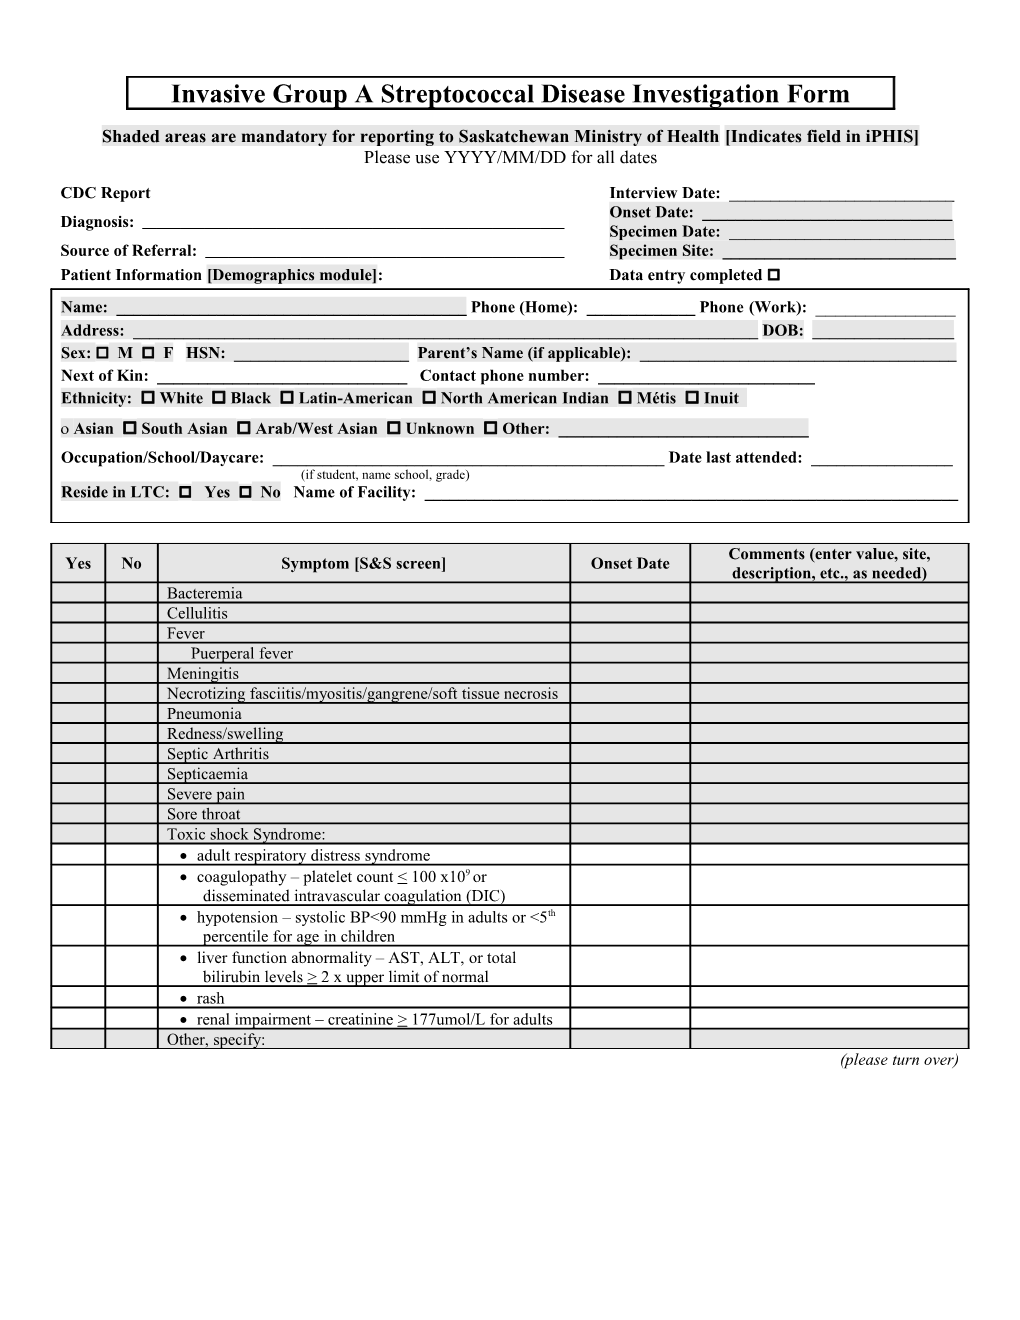 Invasive Group a Streptococcal Disease Investigation Form